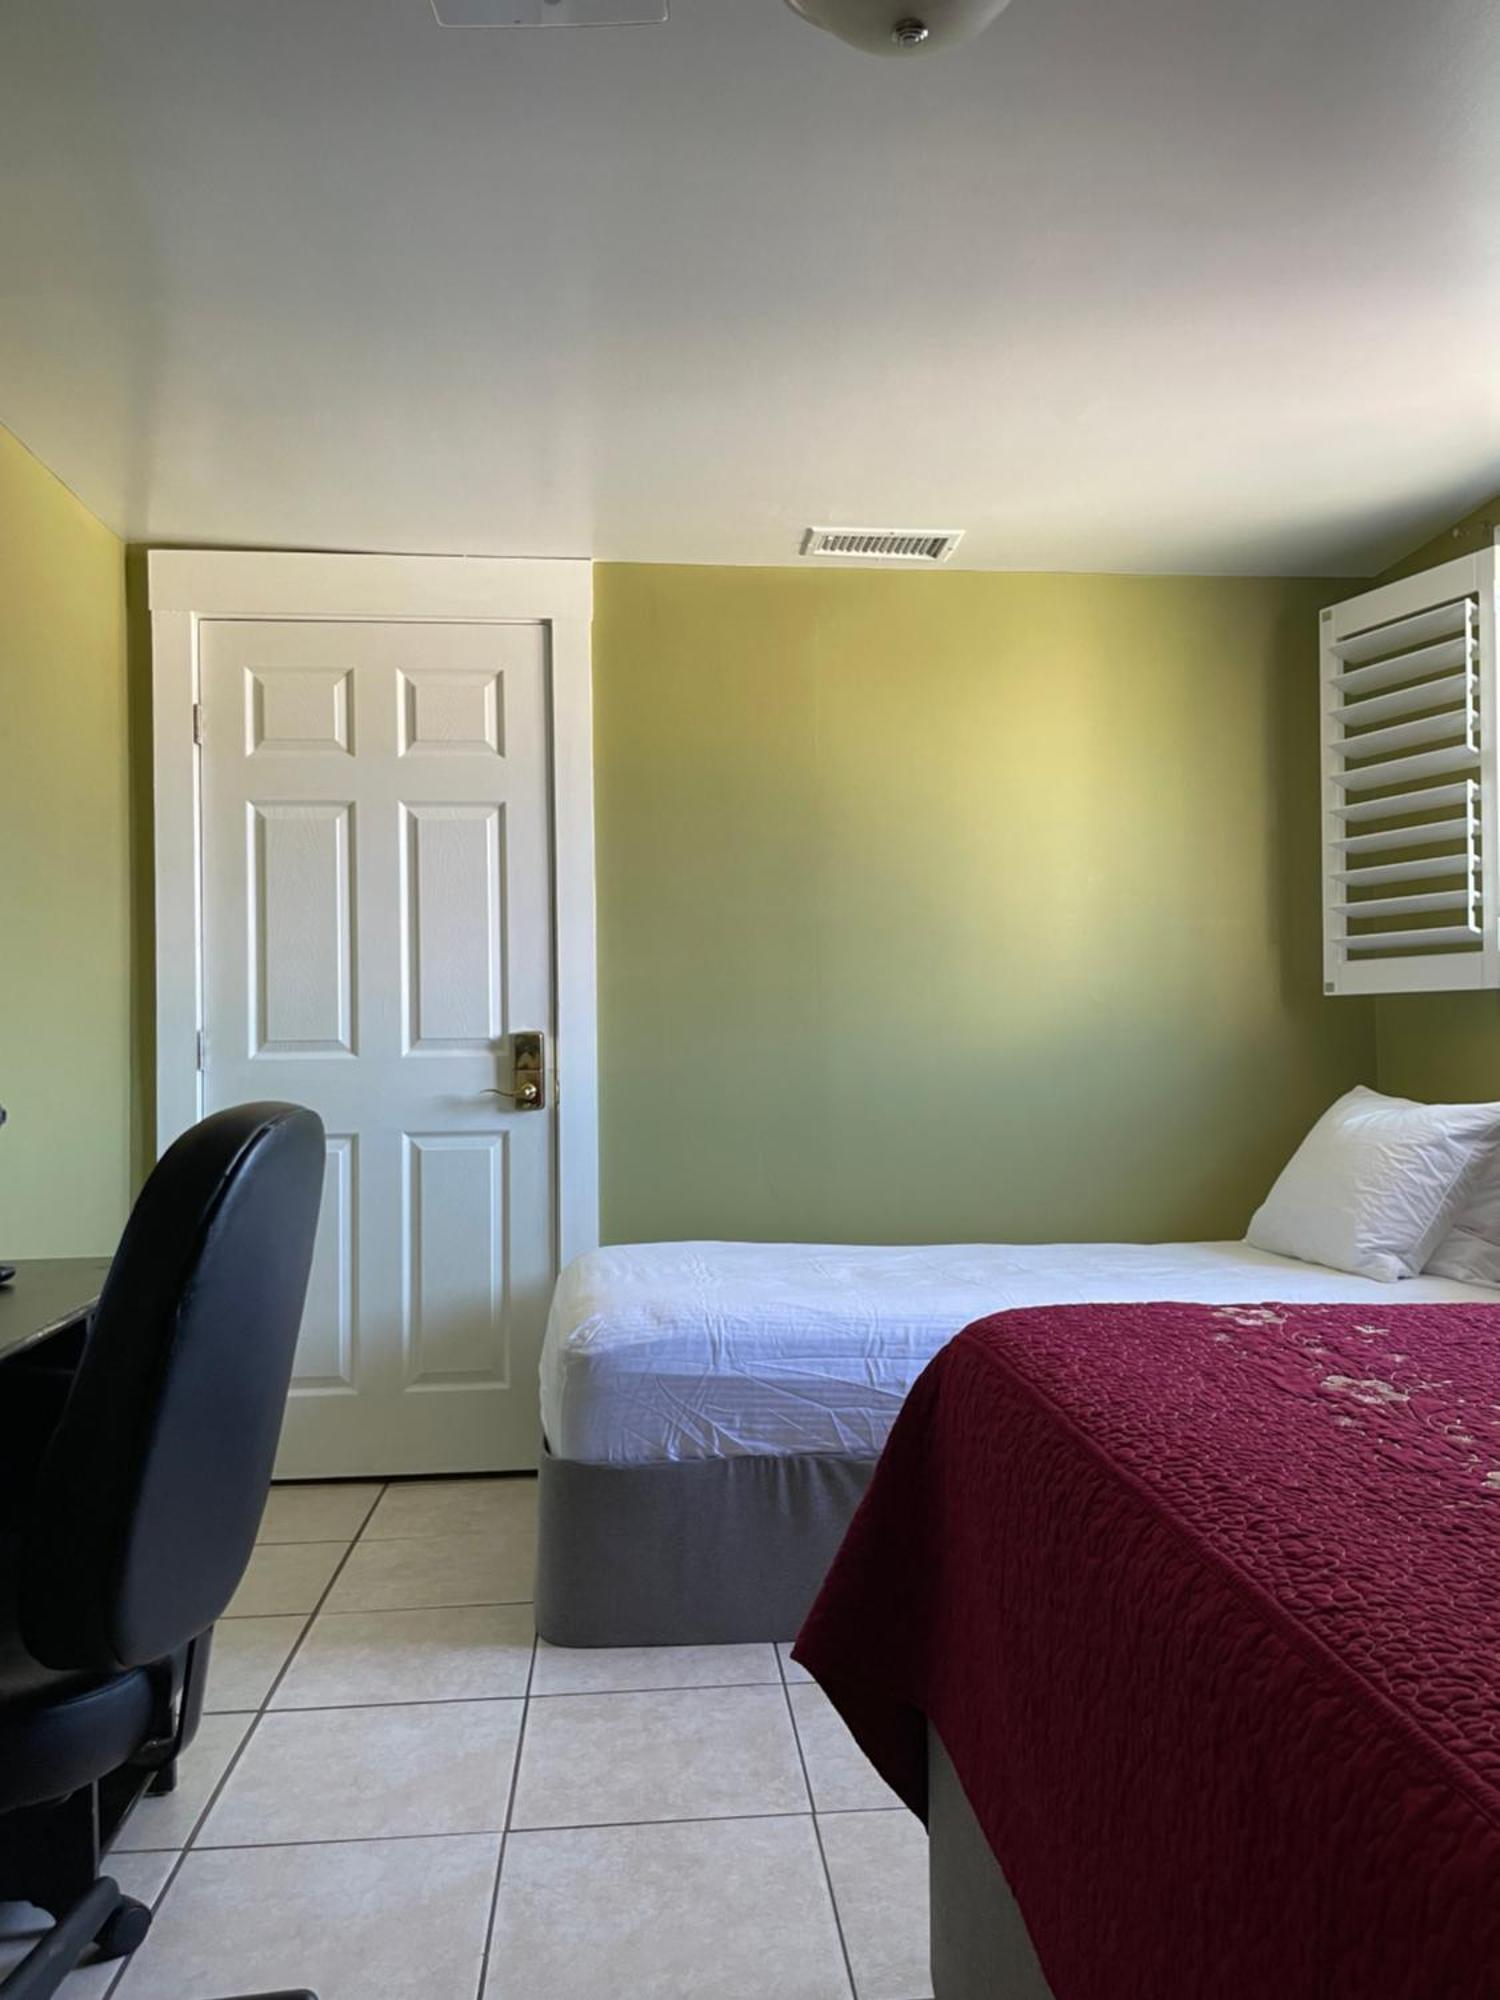 Spacious Private Los Angeles Bedroom With Ac & Wifi & Private Fridge Near Usc The Coliseum Exposition Park Bmo Stadium University Of Southern California Eksteriør billede